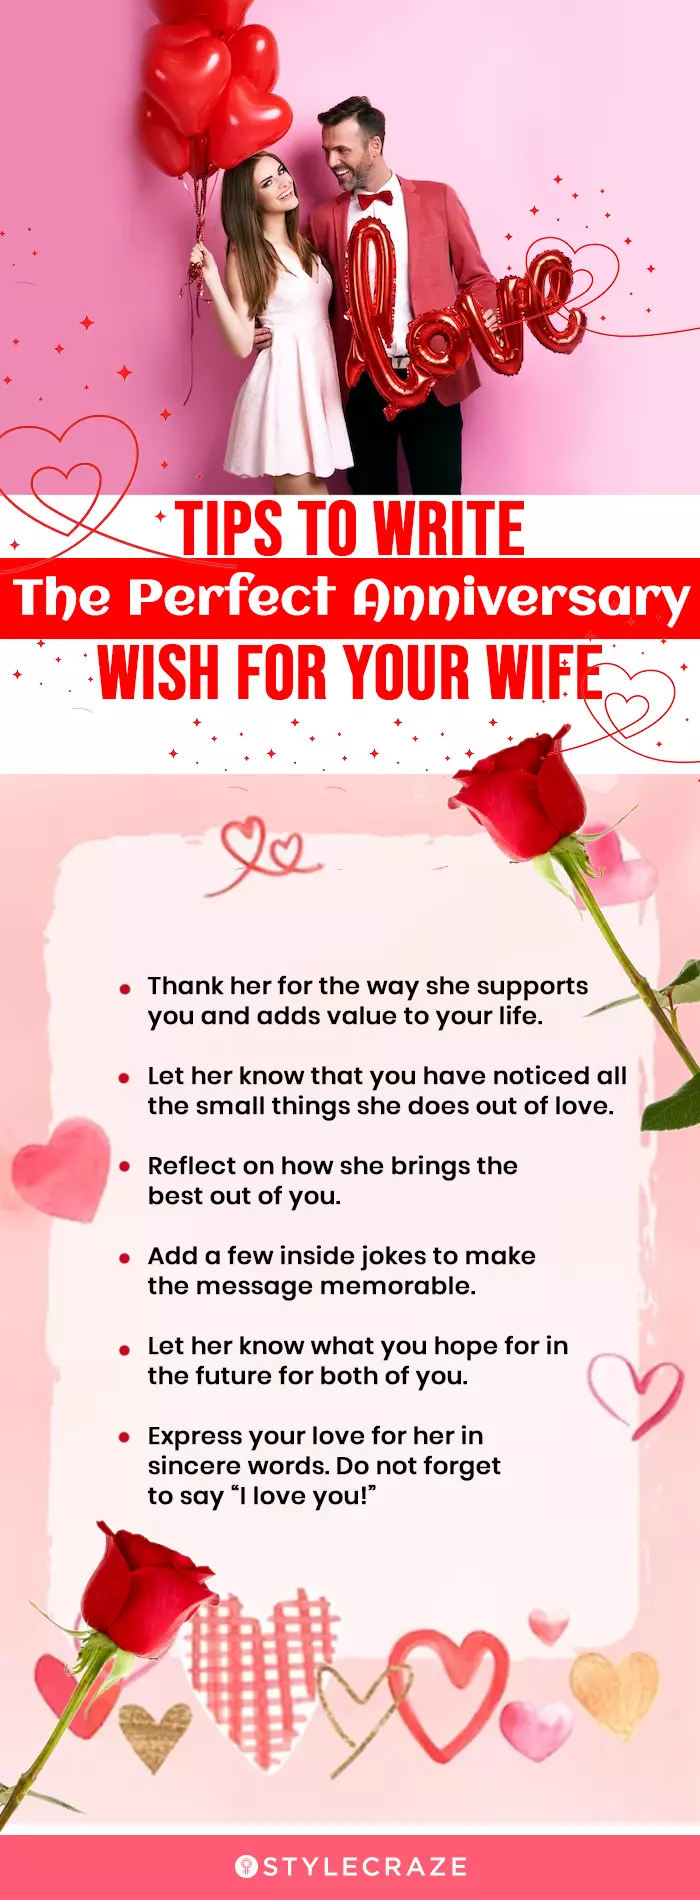 tips to write the perfect anniversary wish for your wife (infographic)